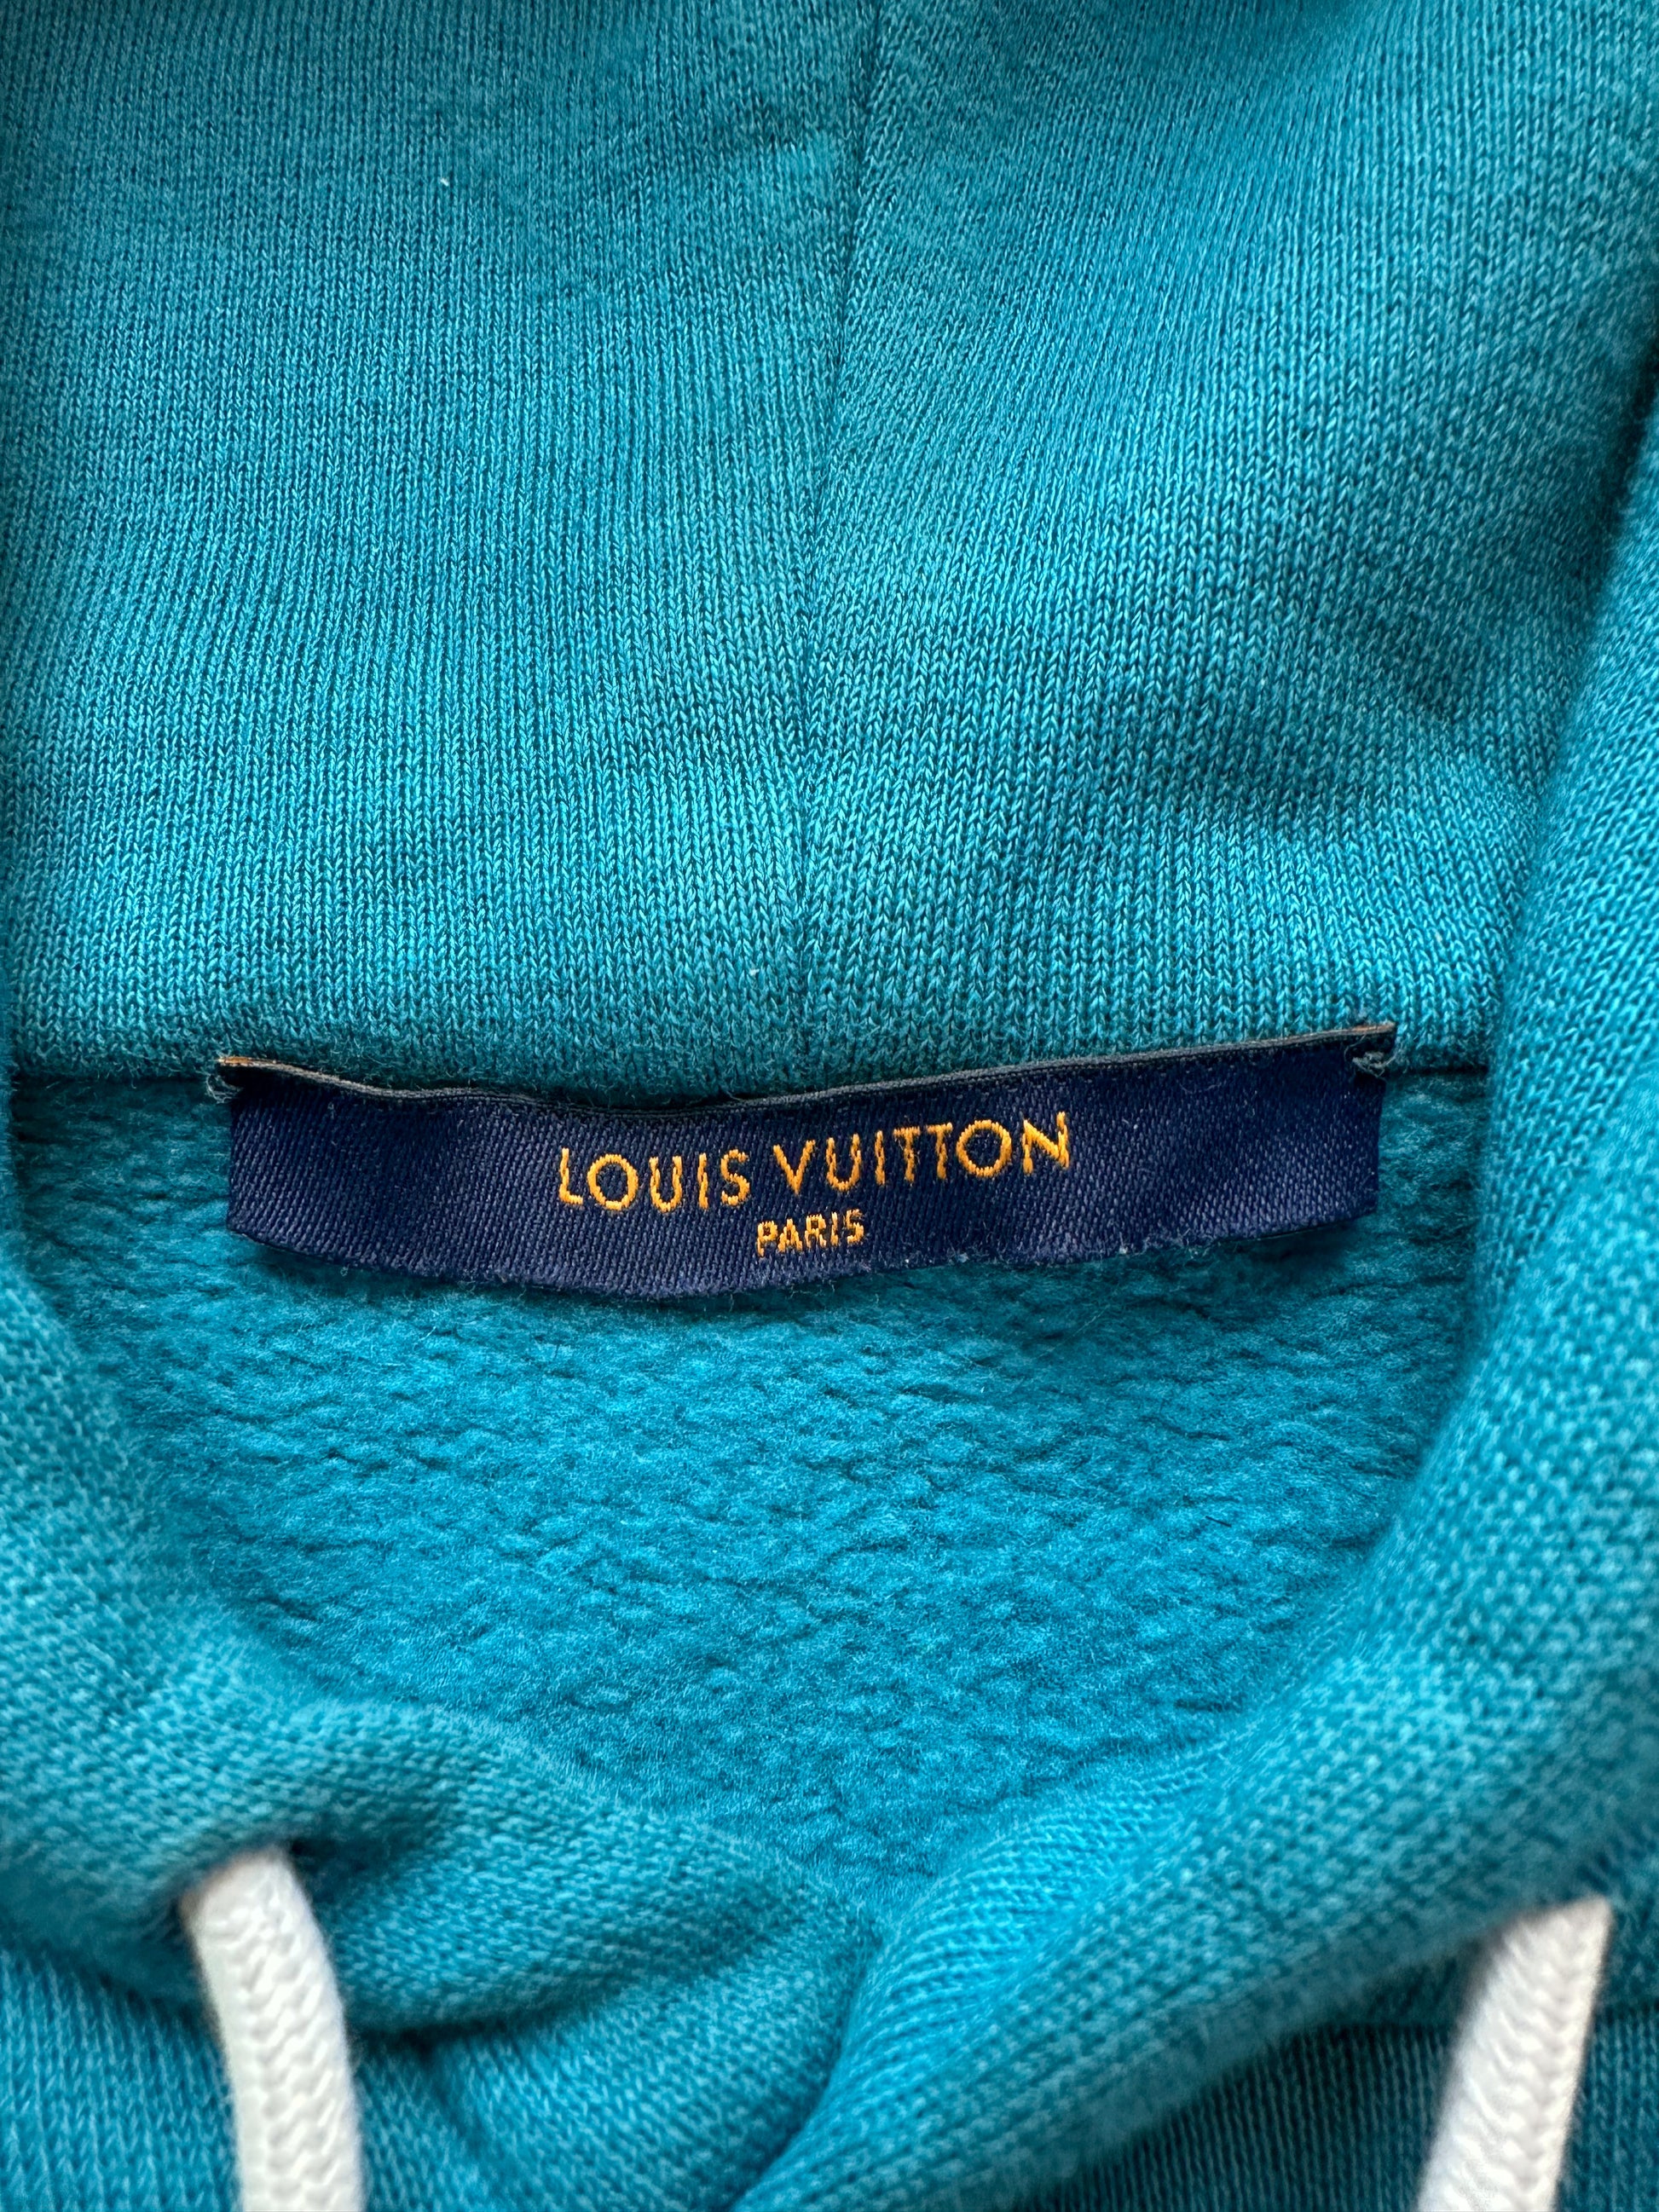 Louis Vuitton Signature Hoodie with Embroidery Green Collar. Size M0